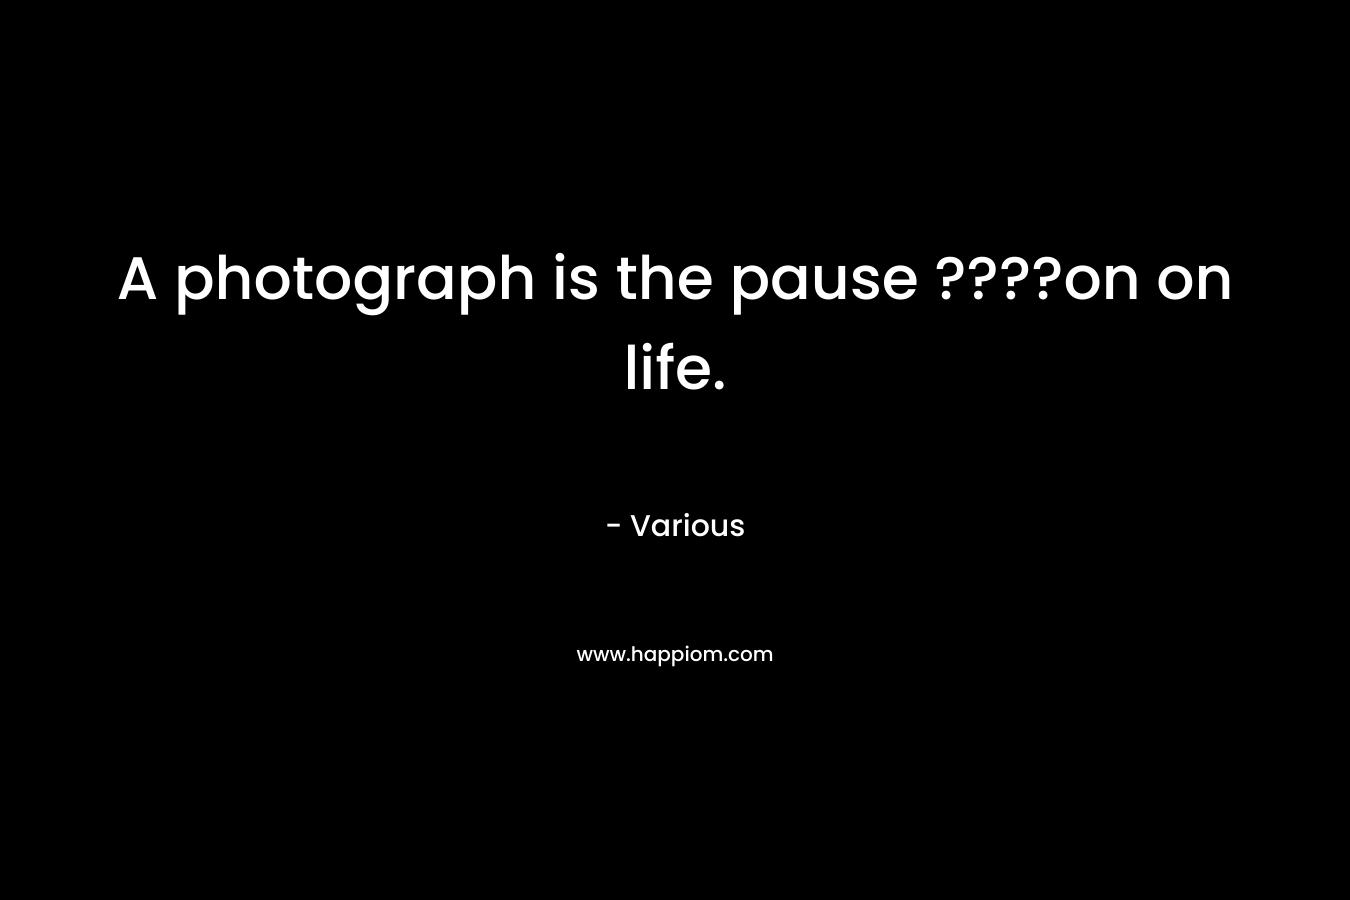 A photograph is the pause ????on on life.